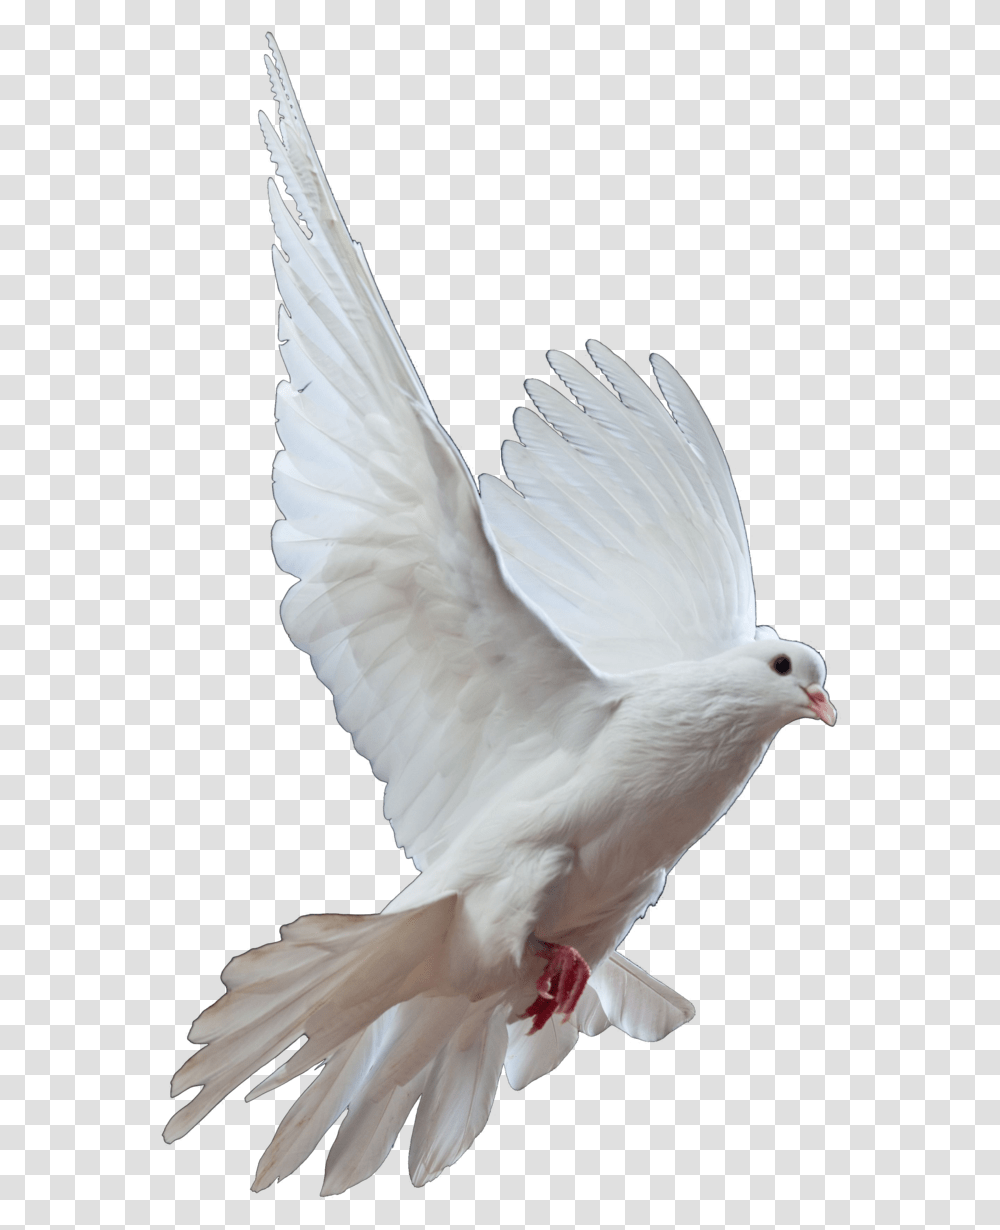 Homing Pigeon Columbidae Bird Doves As Symbols Release Could You Leave Me Standing Alone, Animal Transparent Png